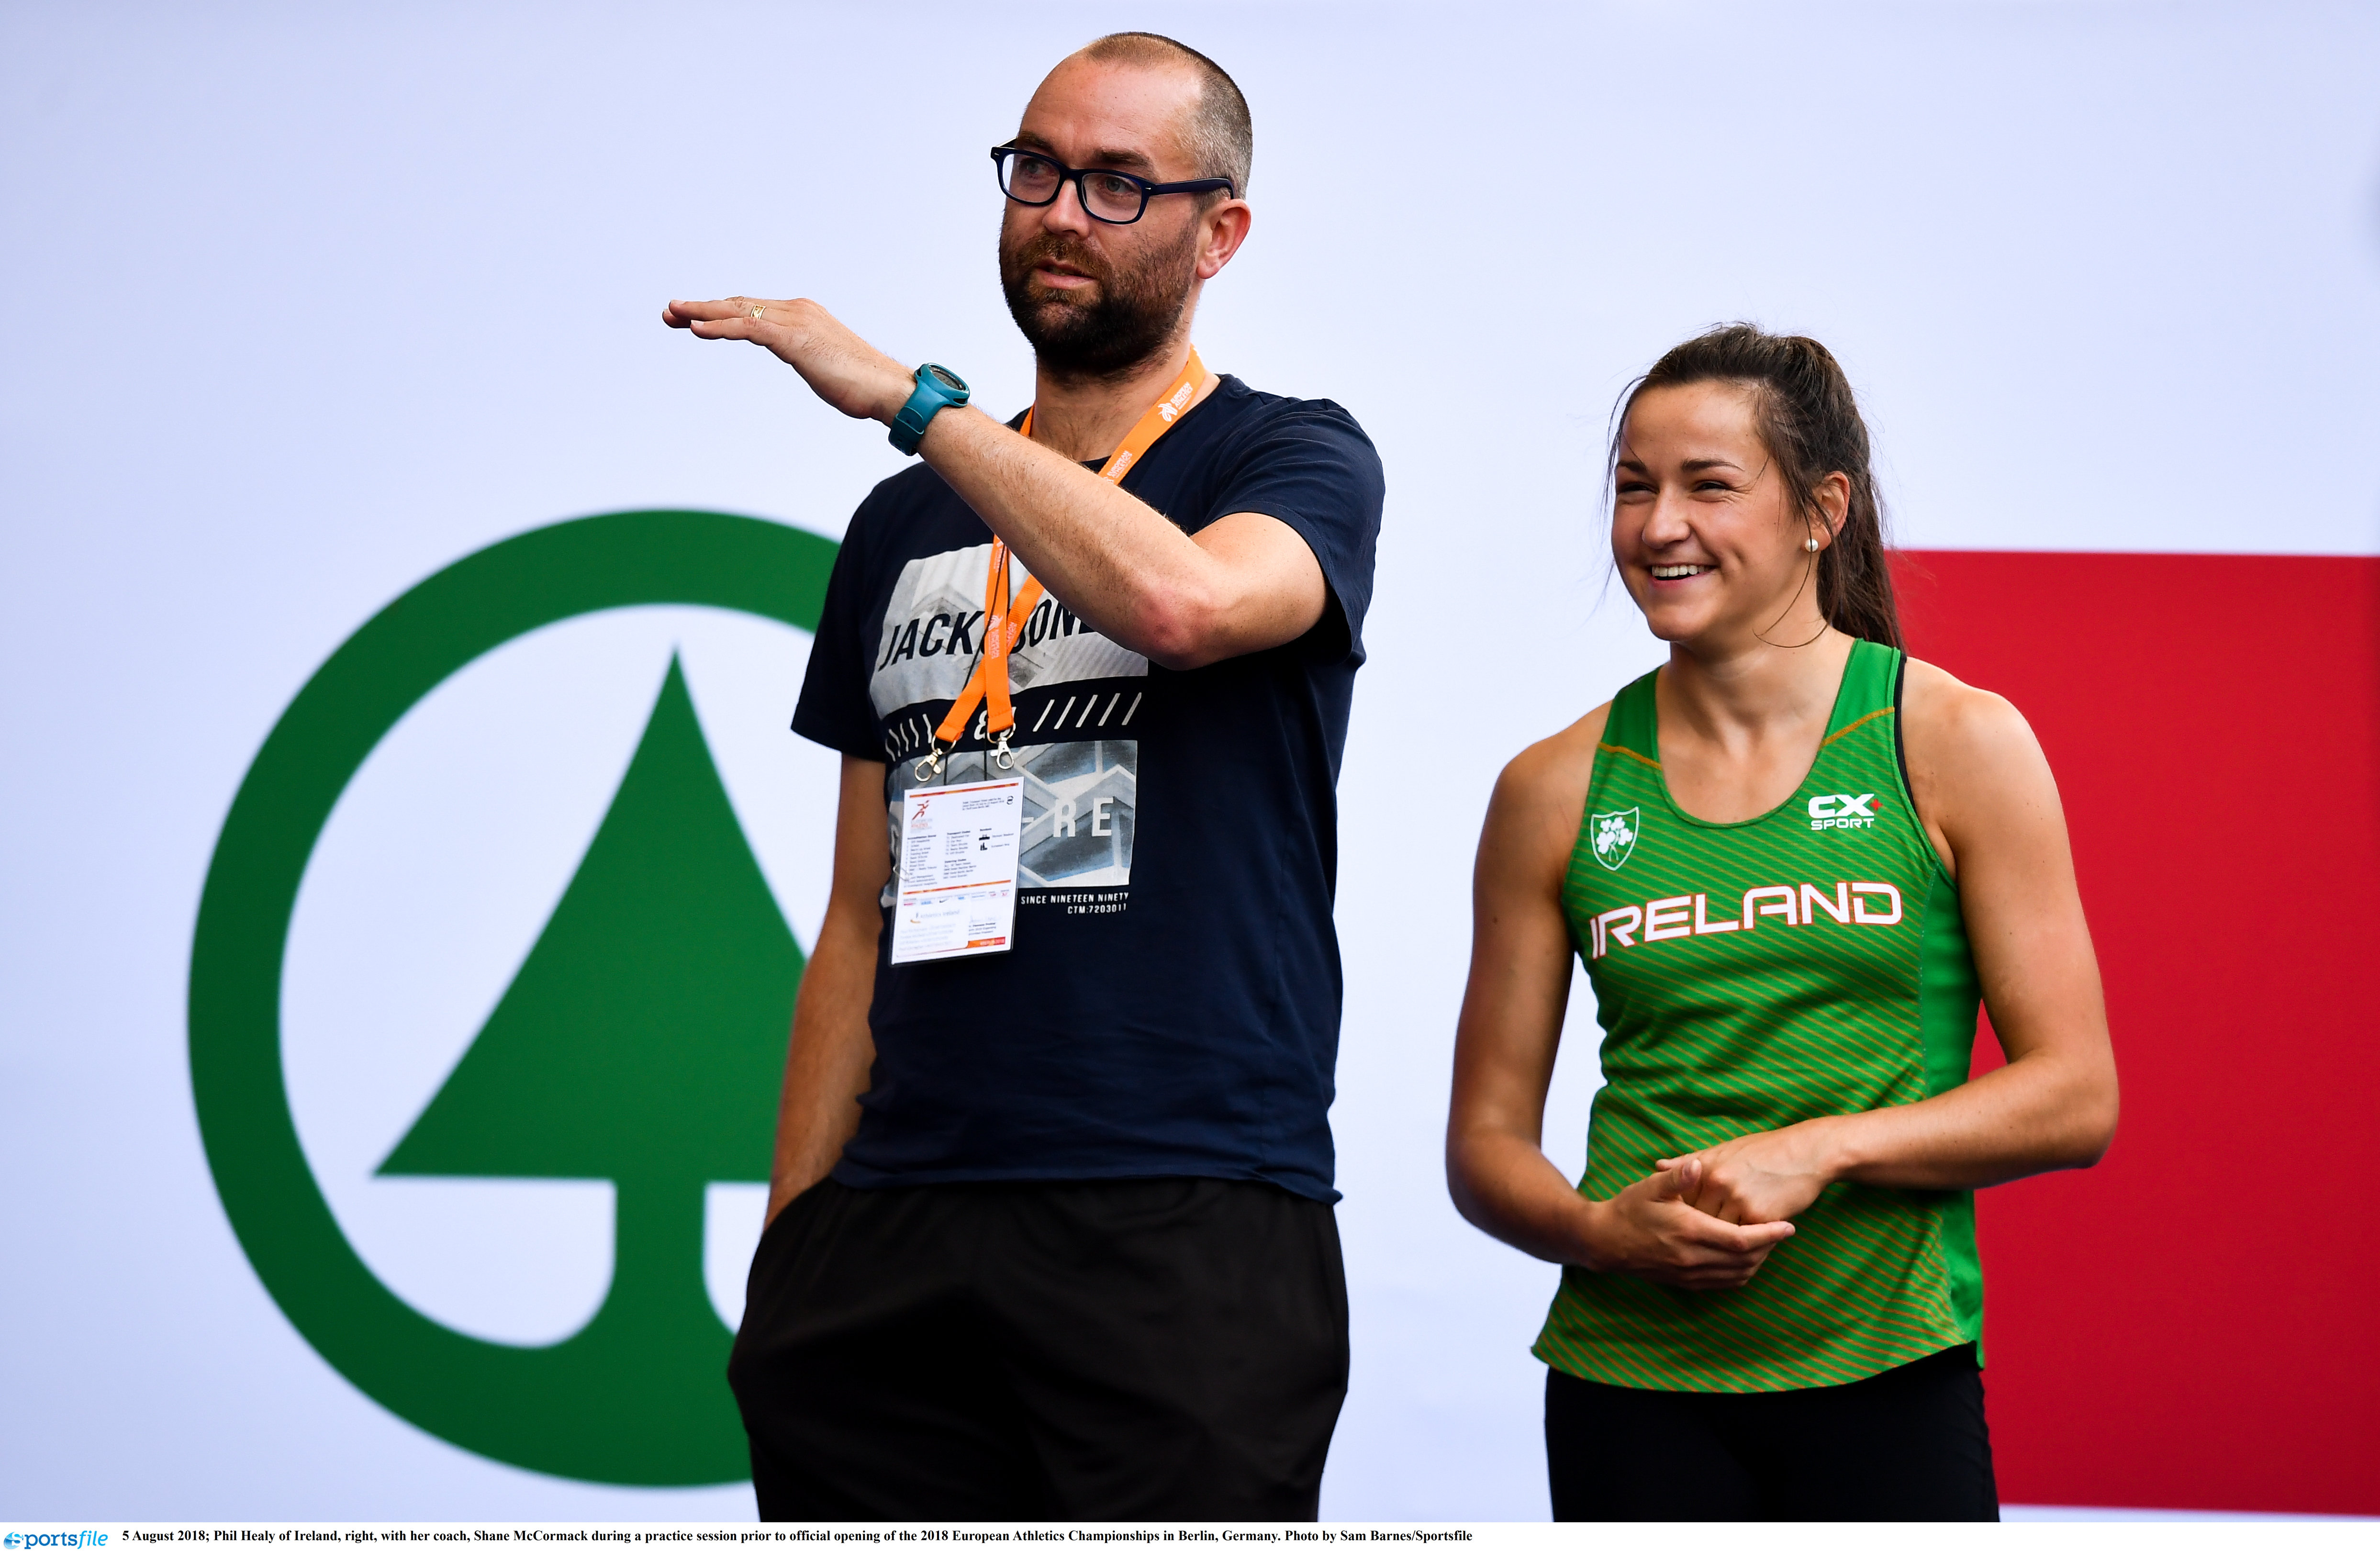 Developing Ireland’s fastest woman: The Journey with Shane McCormack